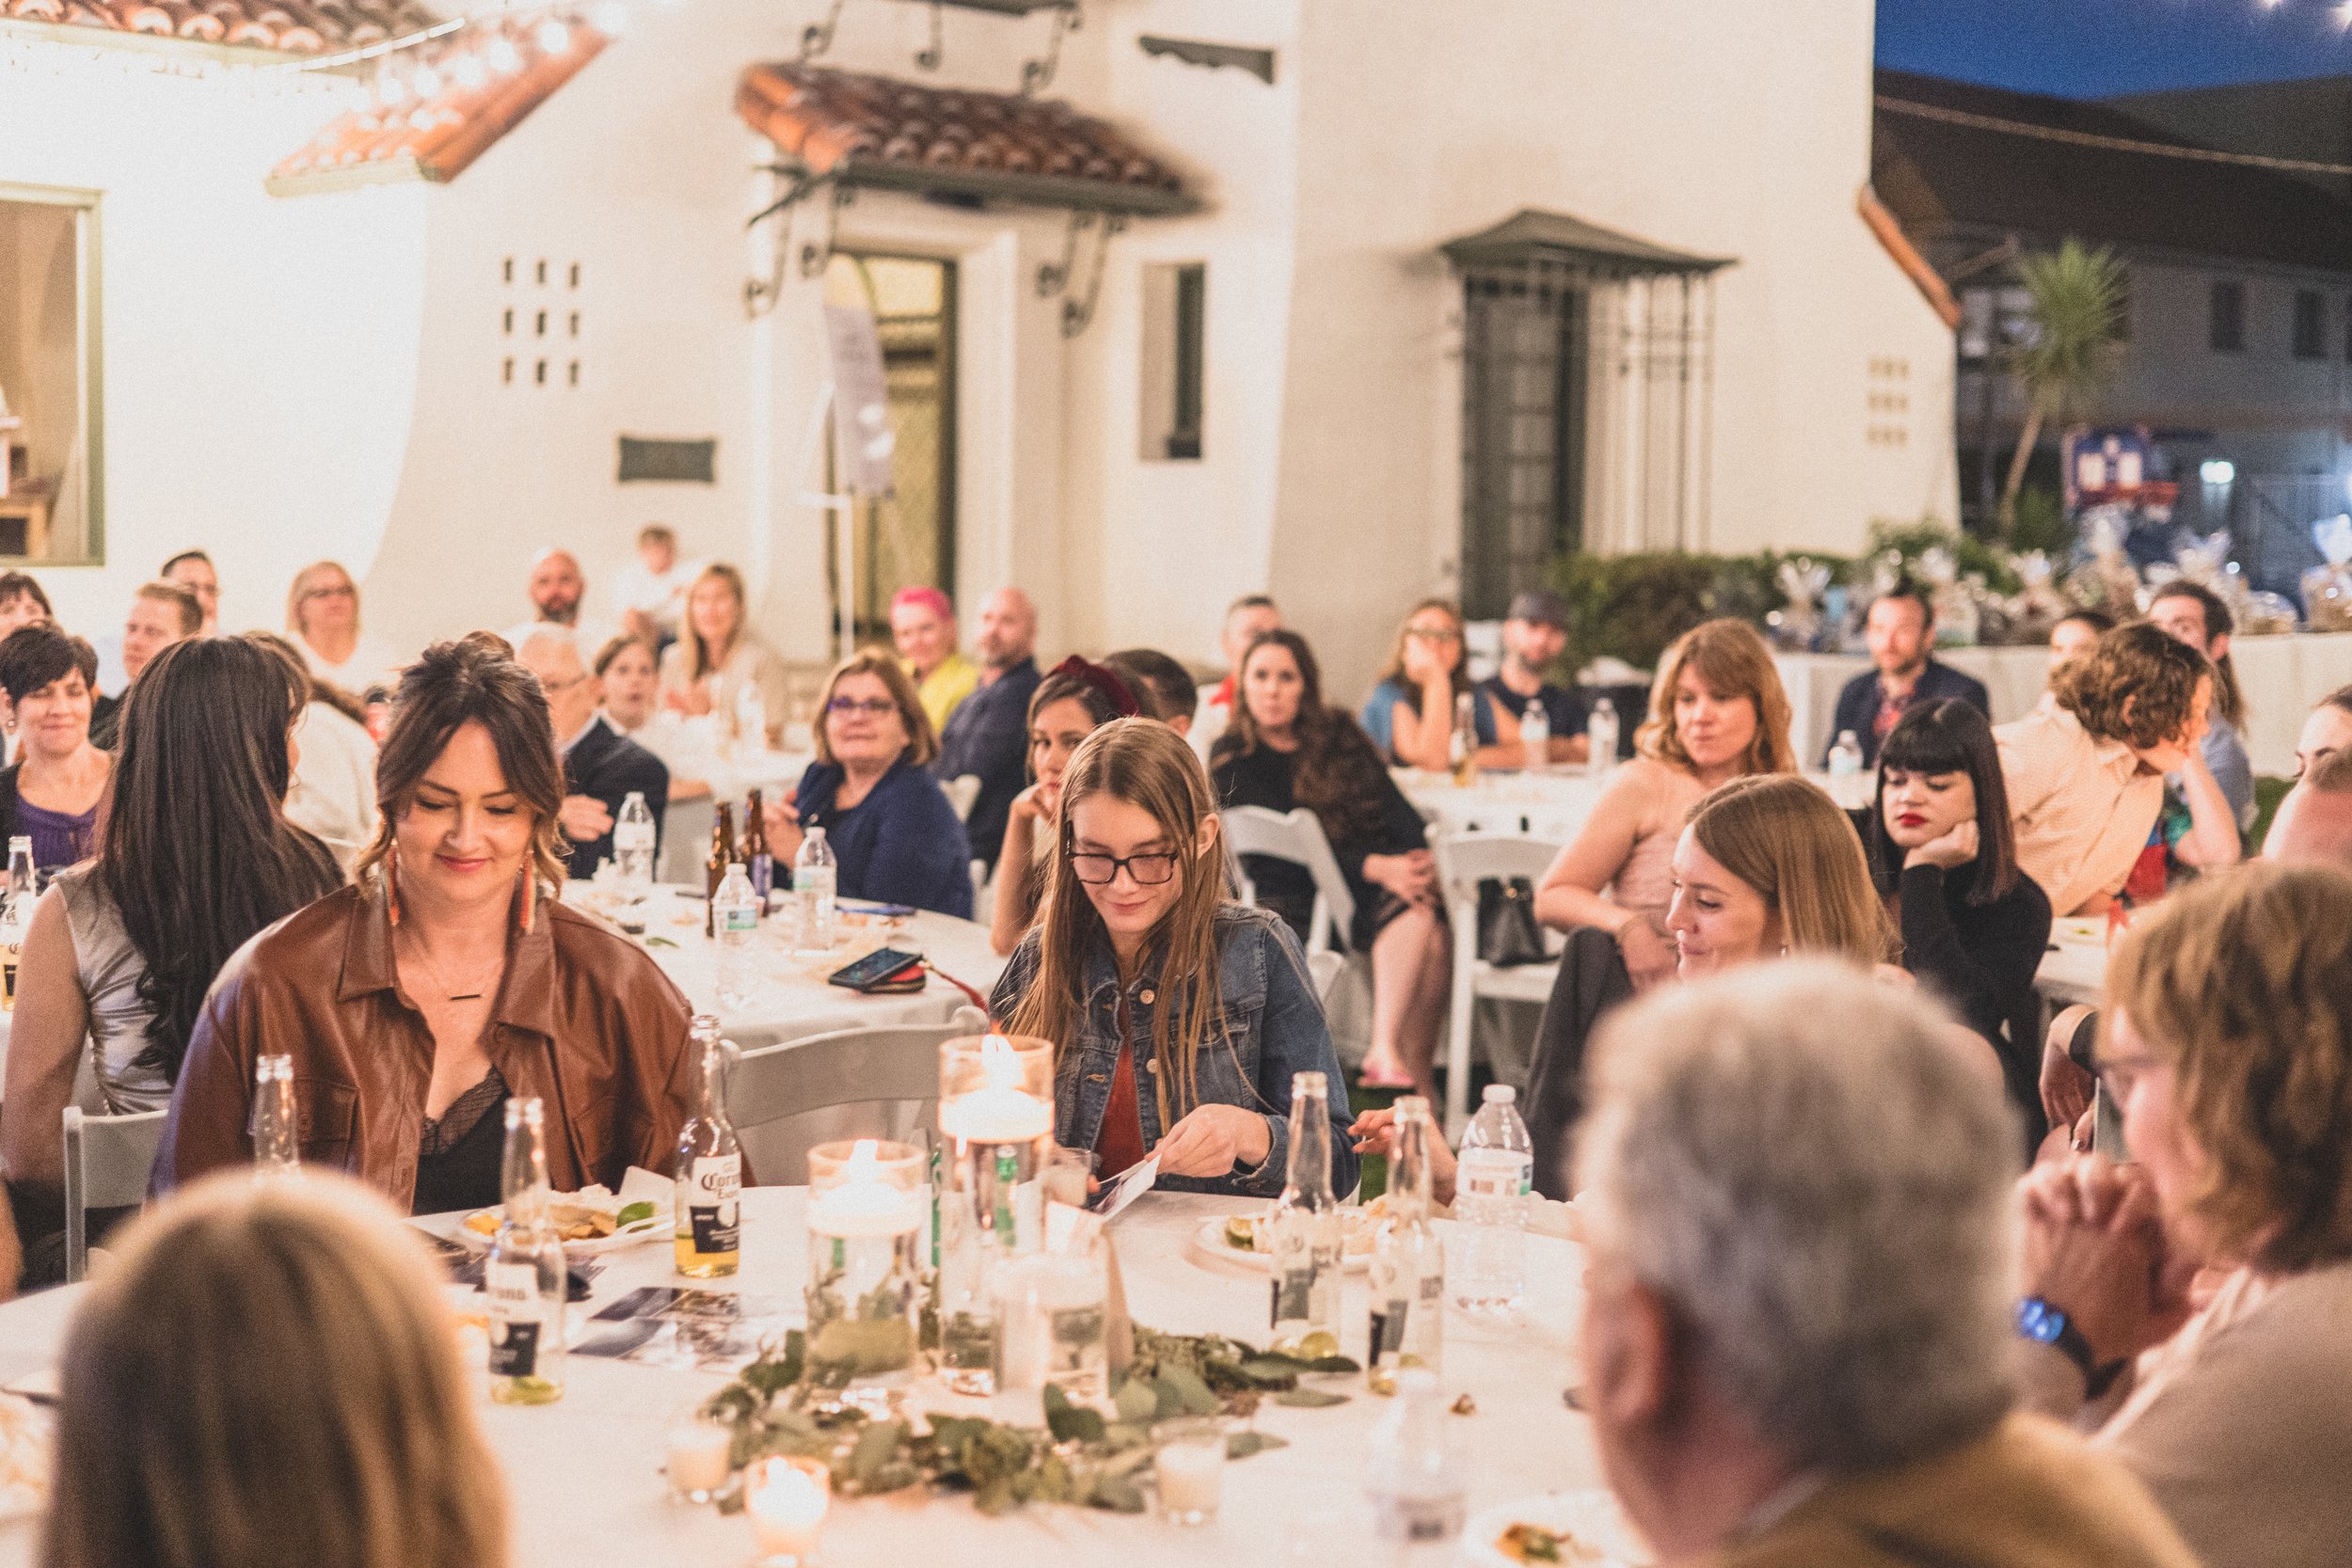 Guests at dinner during a Private Corporate event at the Coronado House a Historic Downtown Phoenix's newest venue, by Professional Corporate Event Photographer; Jennifer Lind Schutsky.